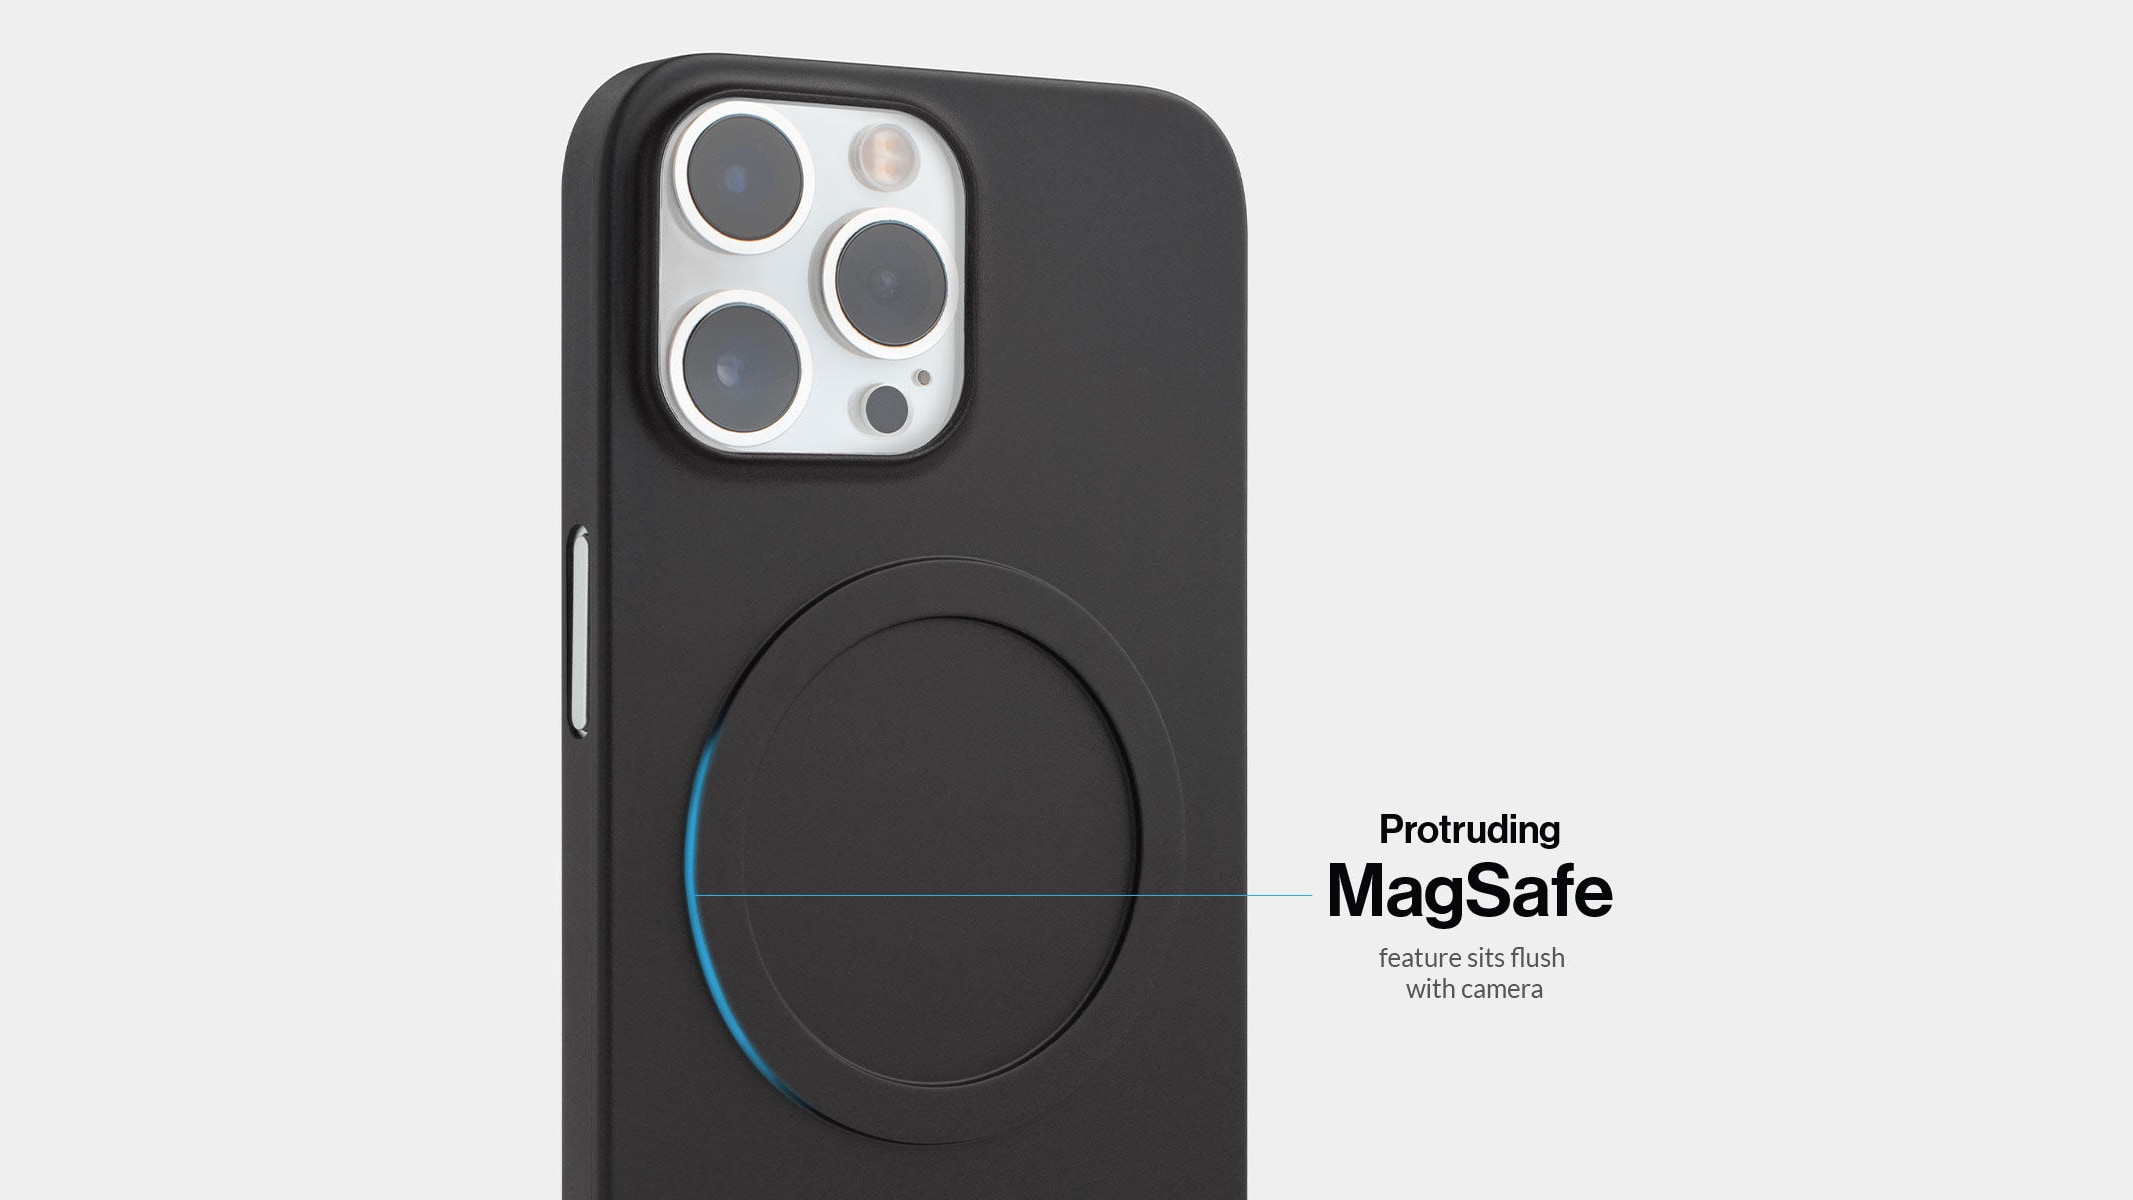 Silver iPhone 14 Pro Max in Totallee's MagSafe case with the tagline "Protruding MagSAfe features sit flush with the camera"